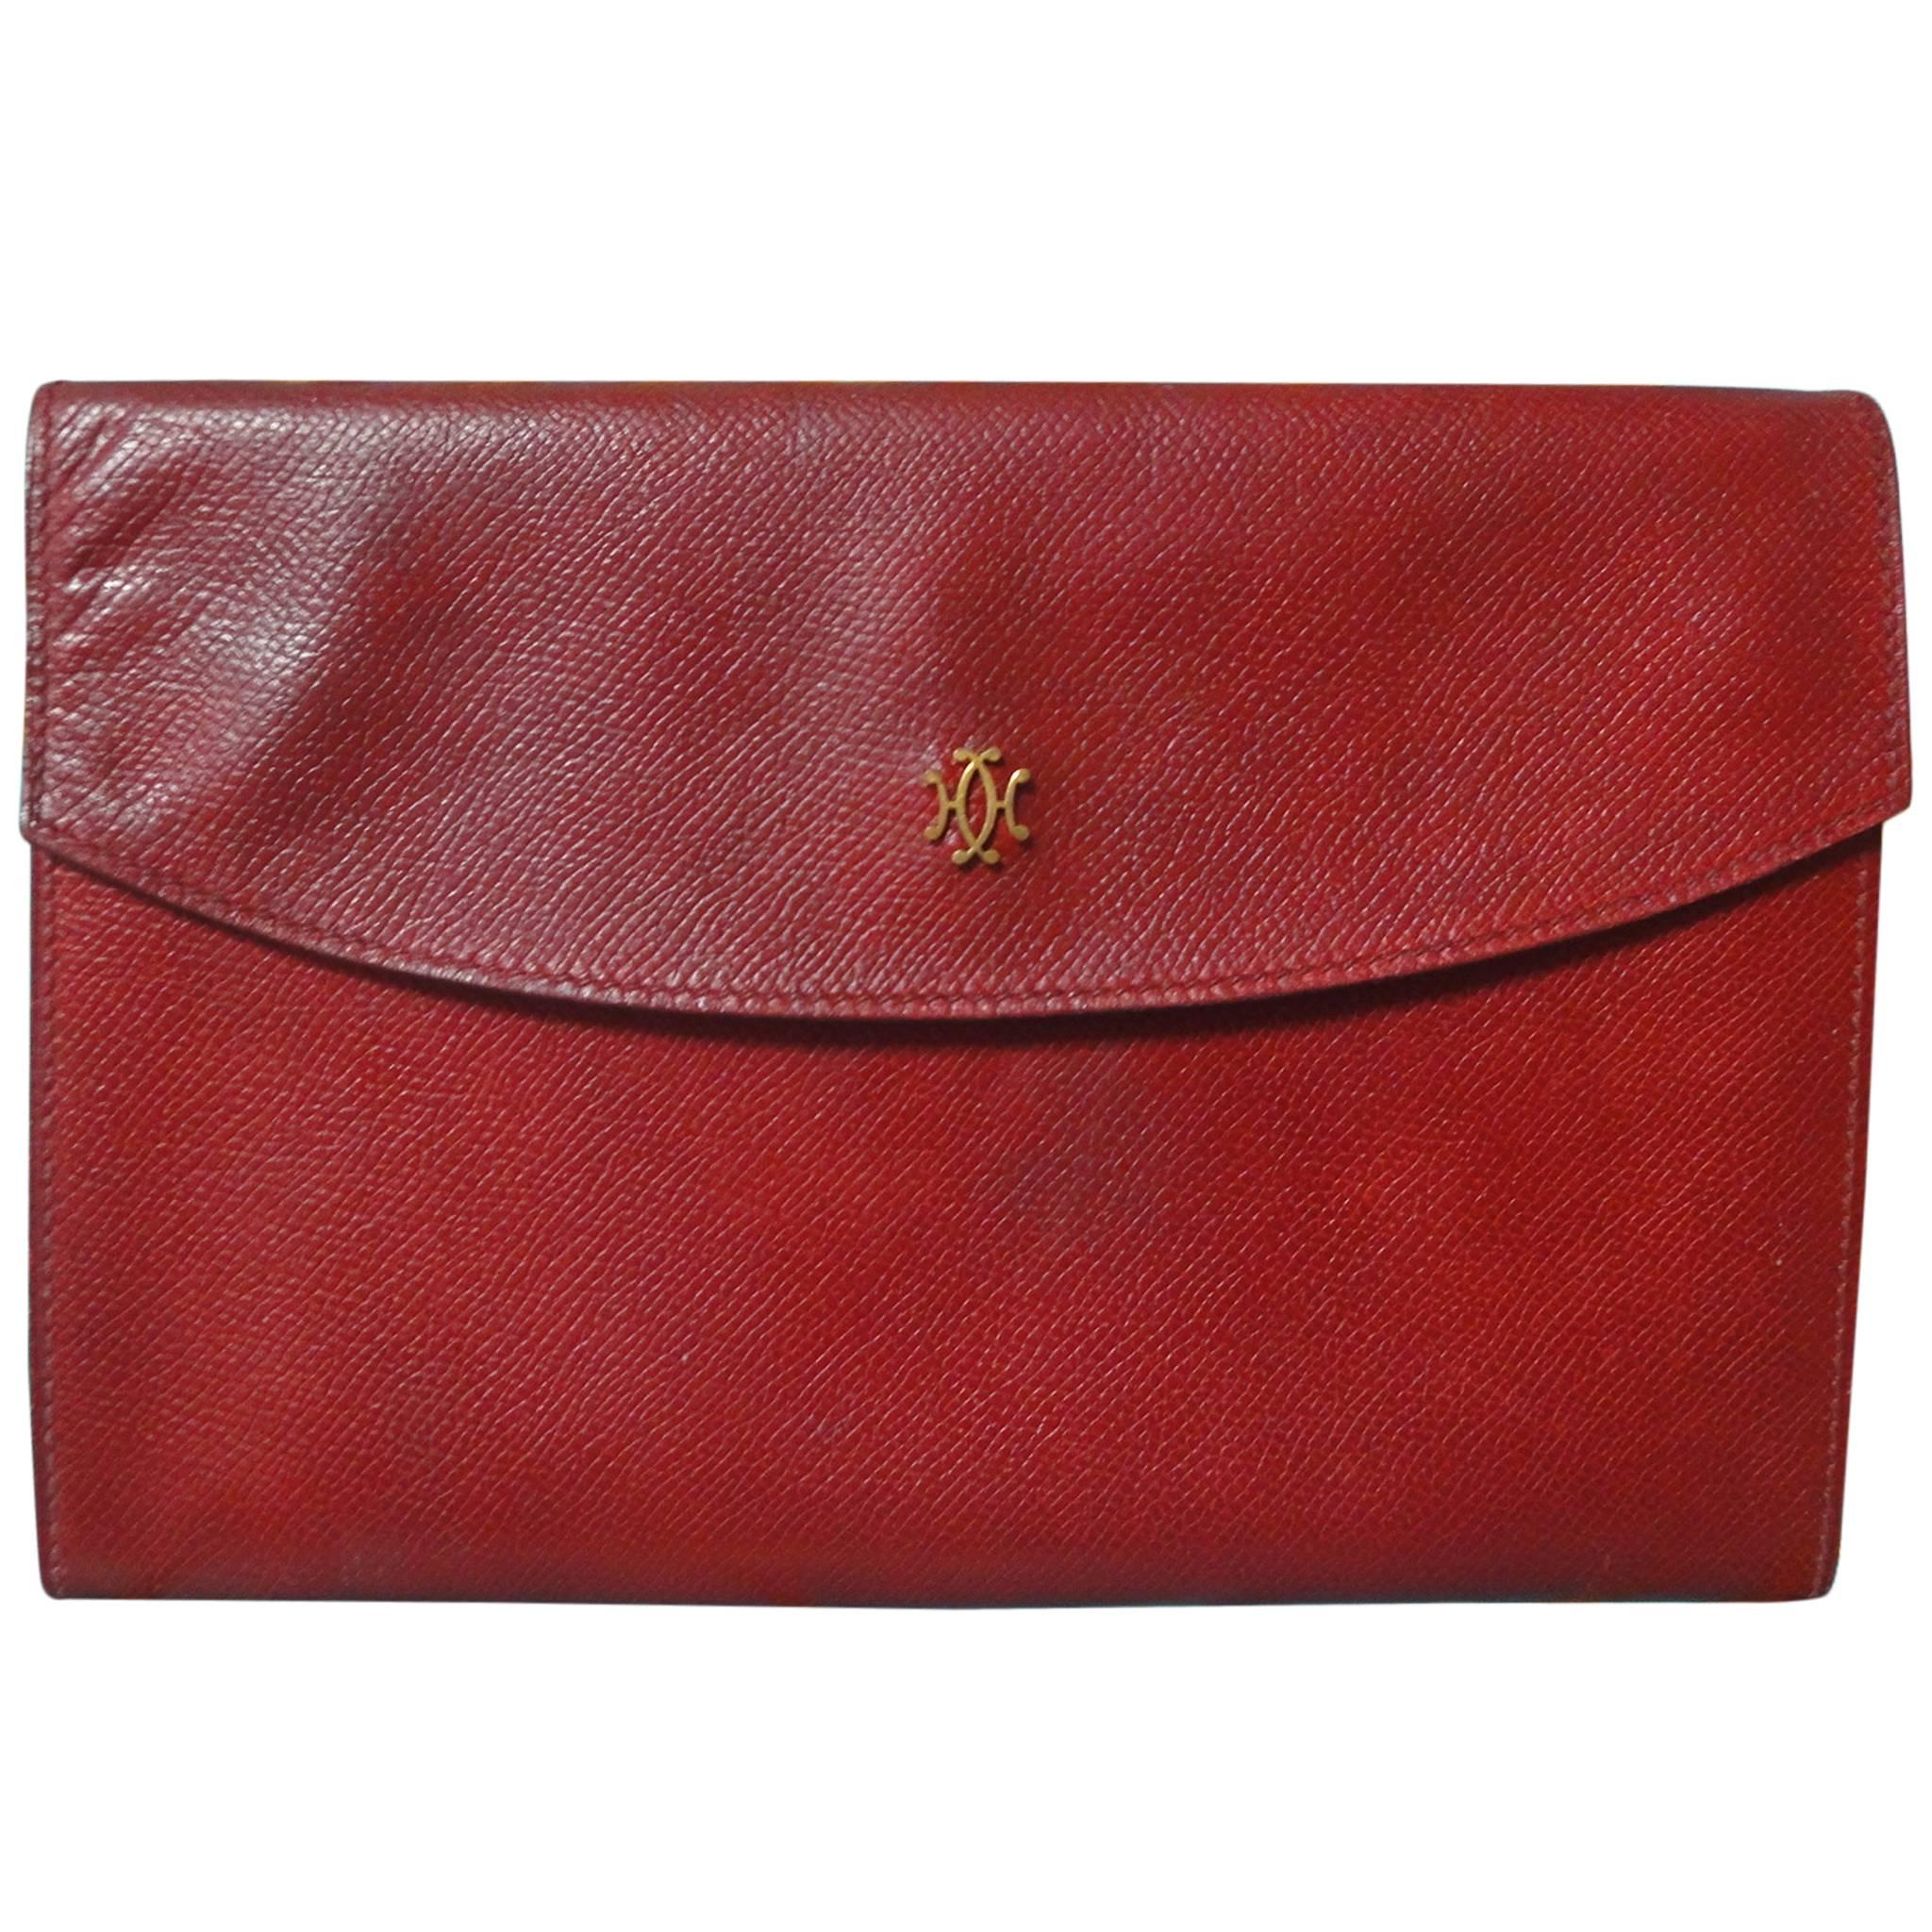 80s vintage HERMES brick red leather clutch pouch. can be wallet purse as well. For Sale